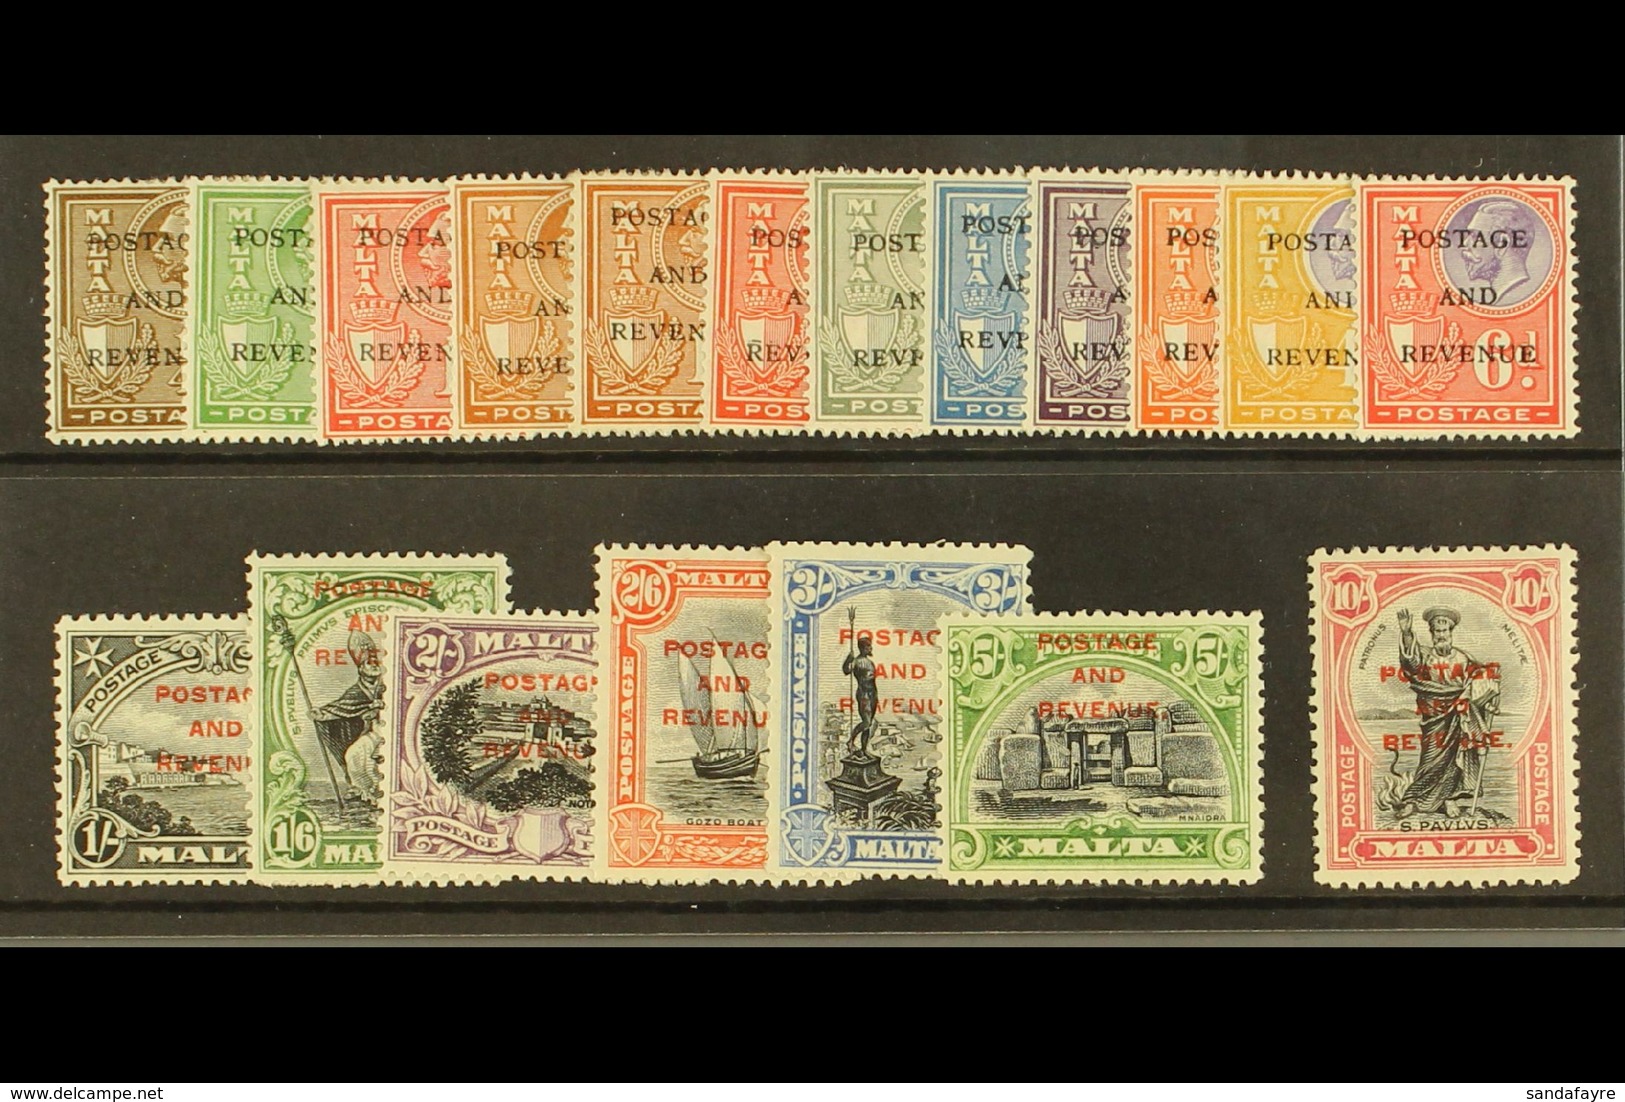 1928 St Paul, Postage And Revenue Ovpt Set Complete, SG 174/92, Very Fine And Fresh Mint. (19 Stamps) For More Images, P - Malta (...-1964)